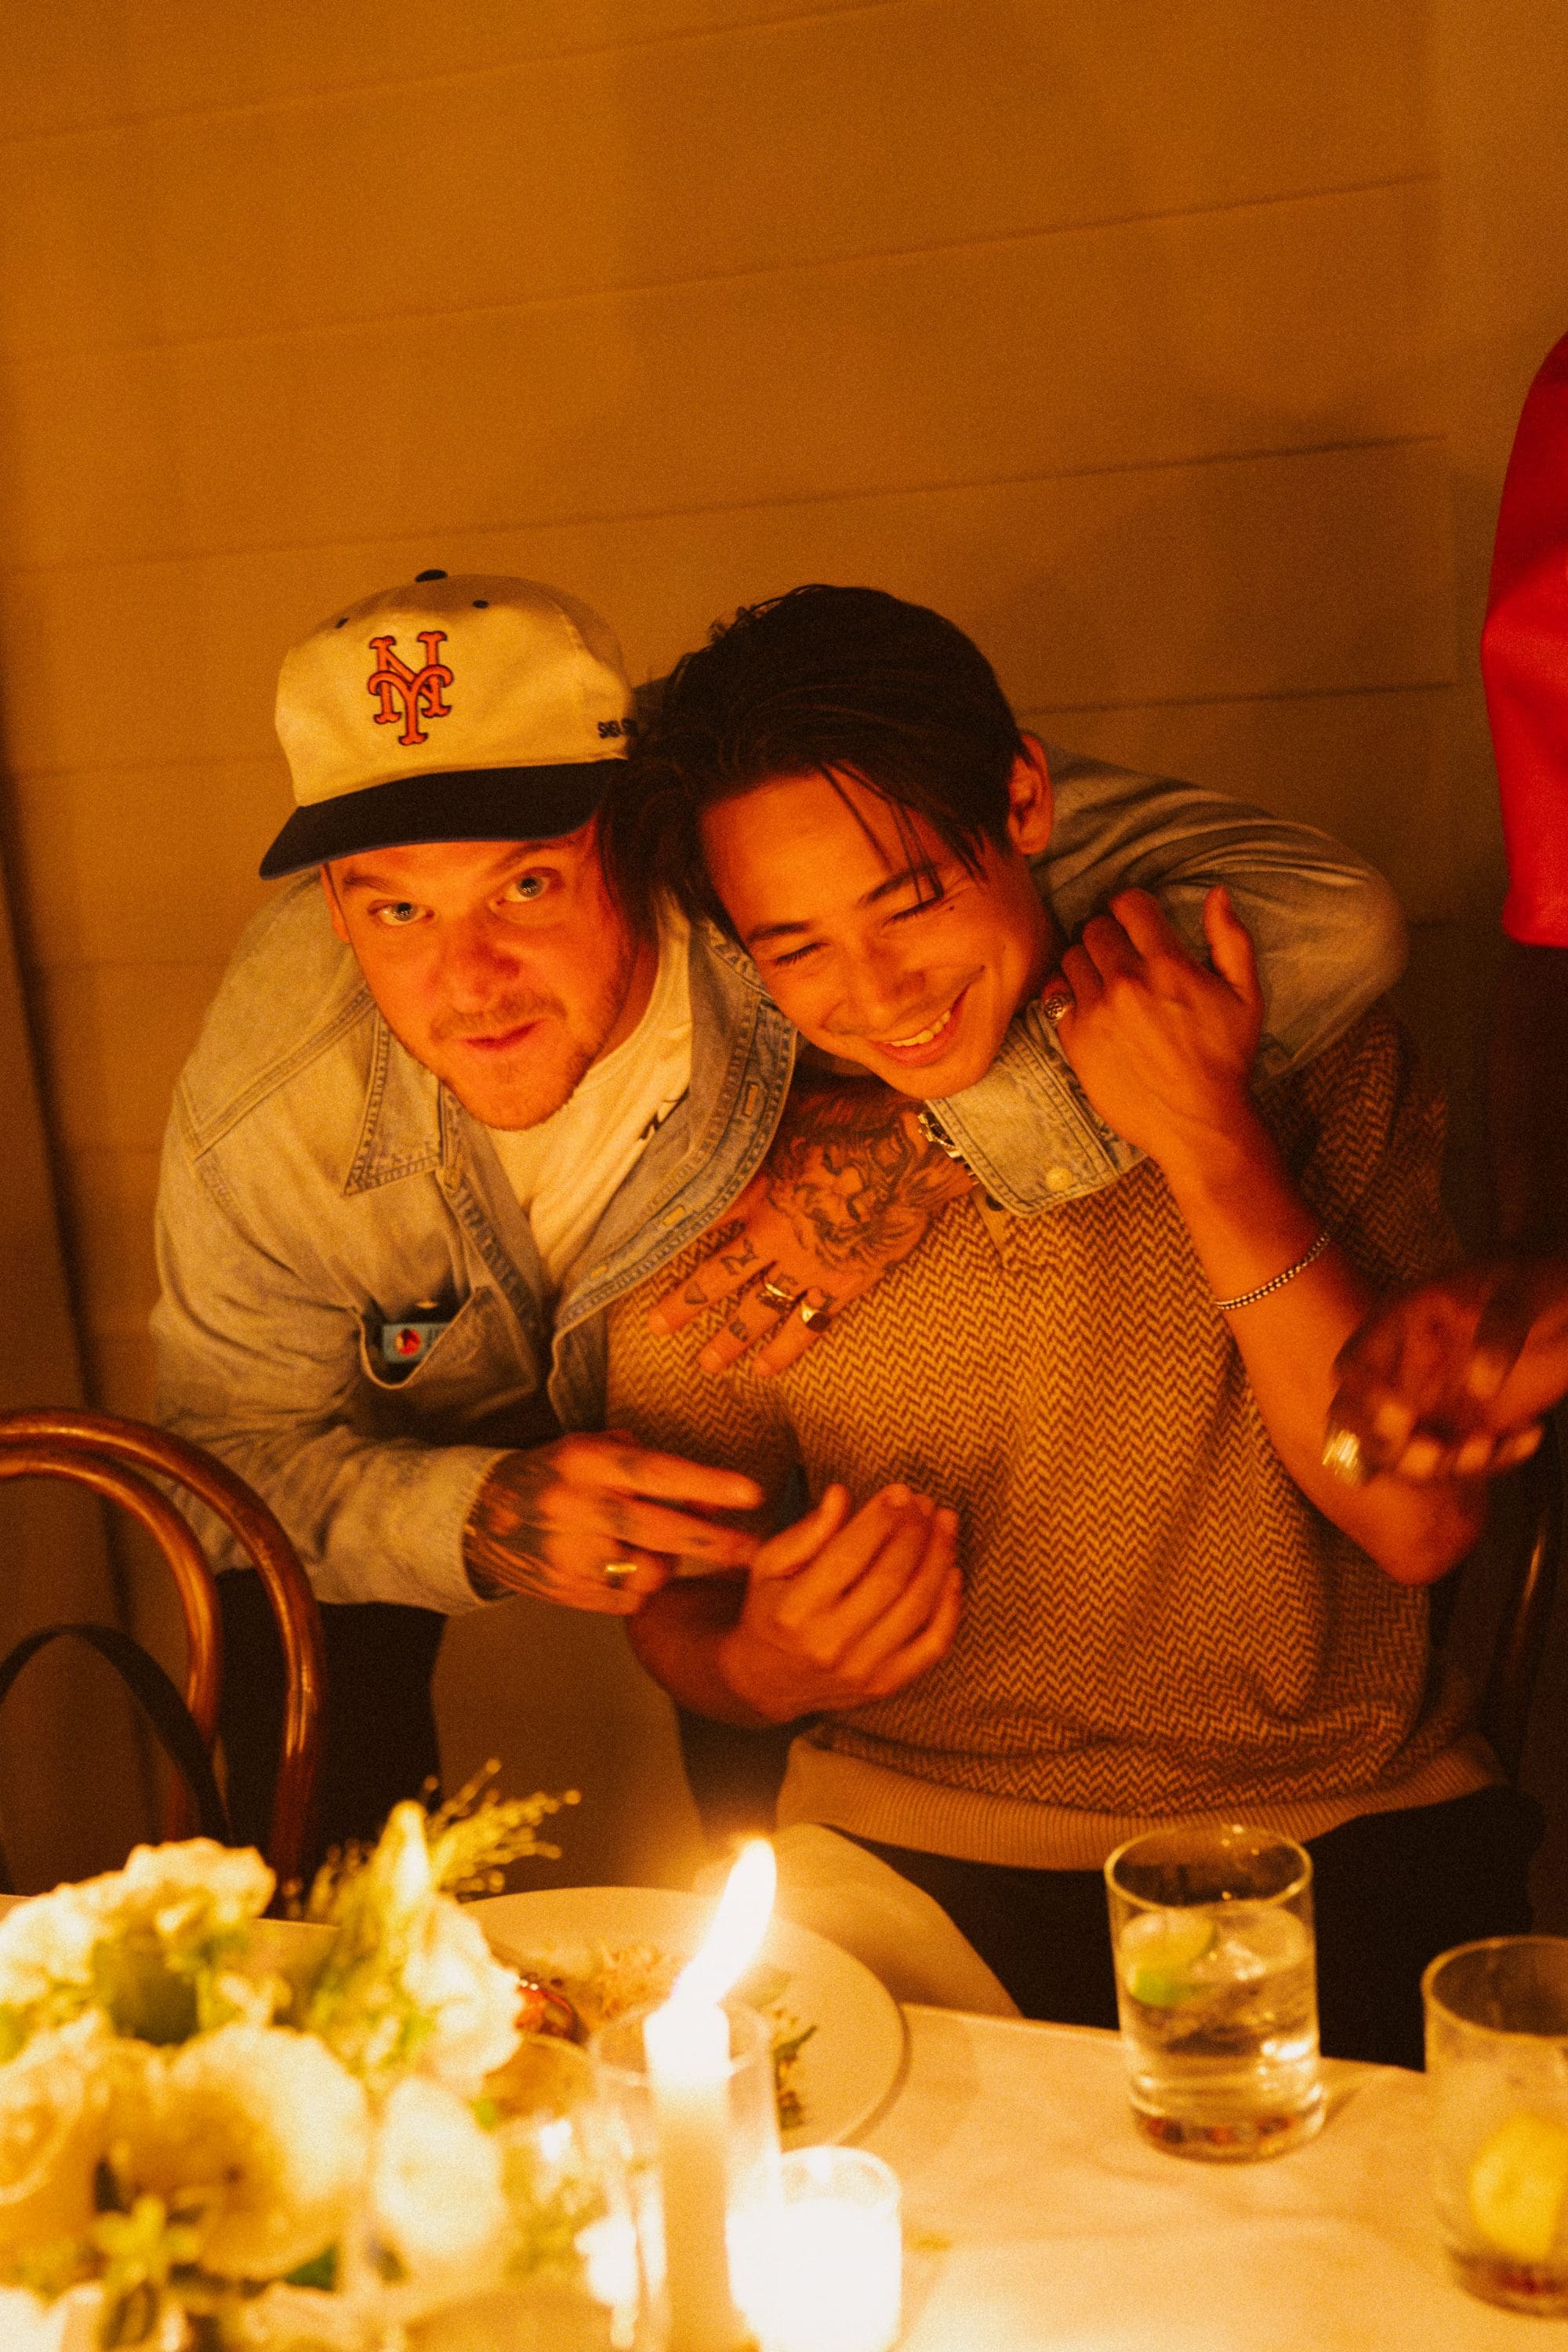 Paulie James and Sean Malto attending UNDEFEATED x G-SHOCK Friends & Family Dinner